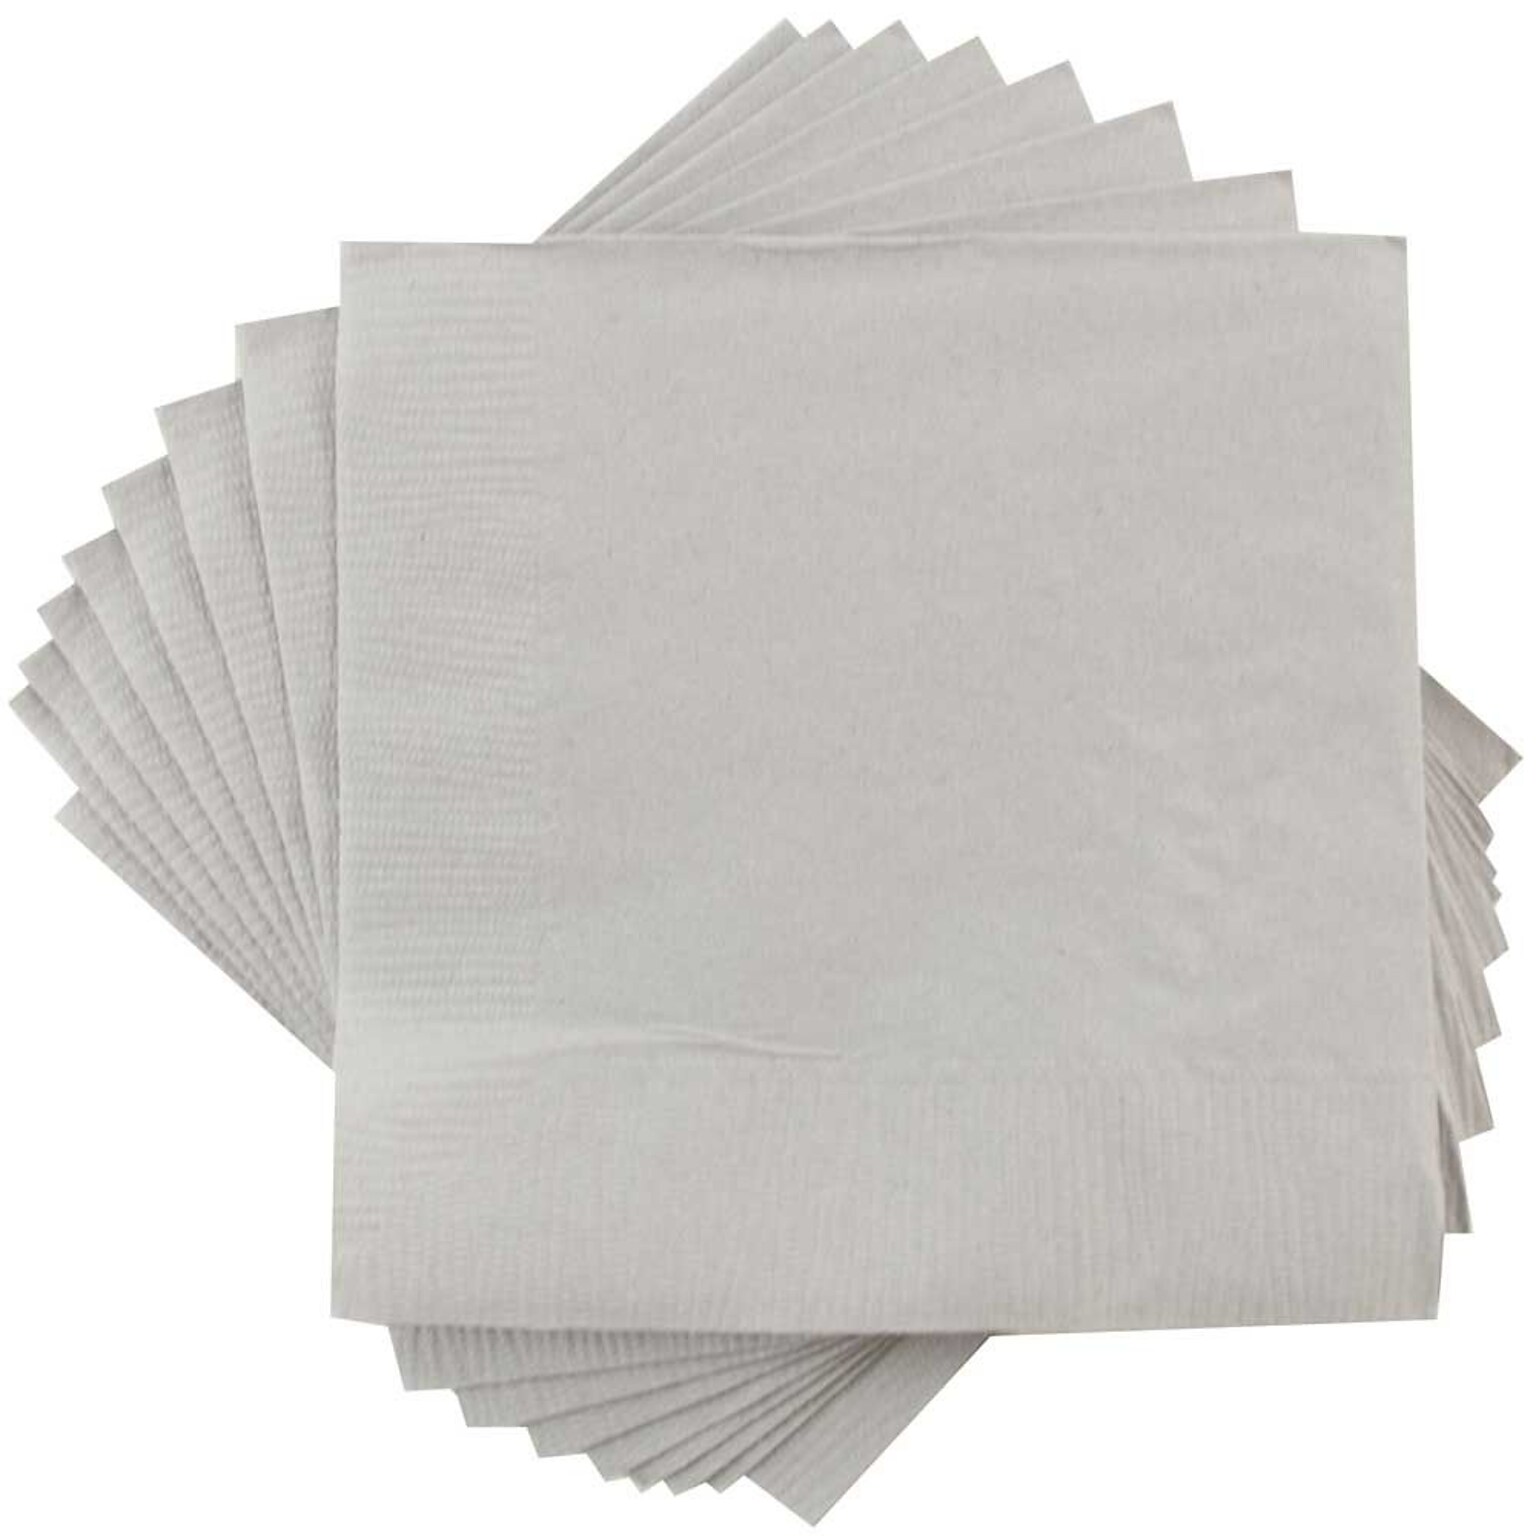 JAM Paper Lunch Napkin, 2-ply, Silver, 50 Napkins/Pack (255628827)